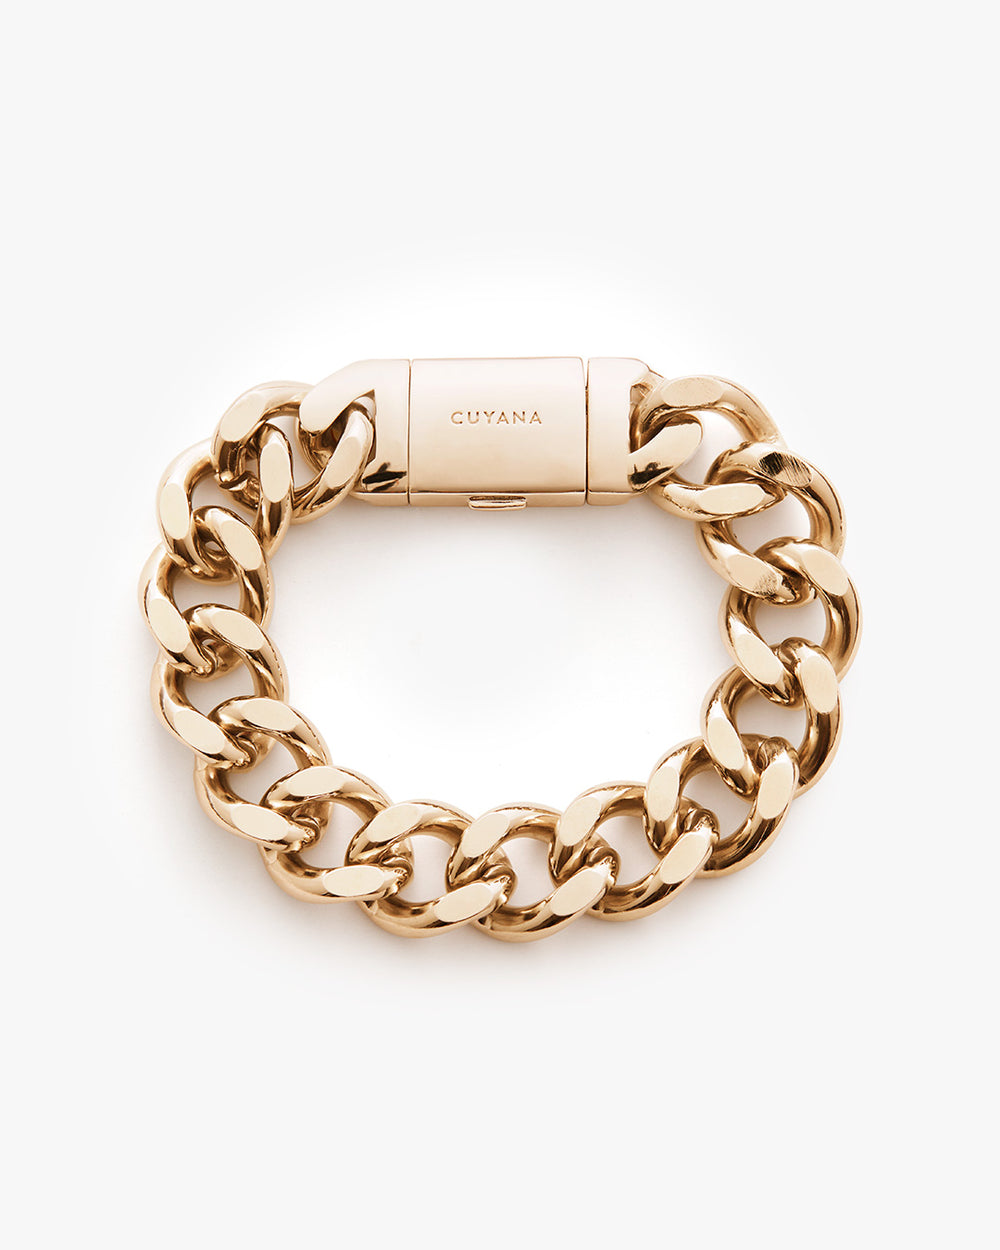 Bracelet with thick chain links and clasp closure on a white background.